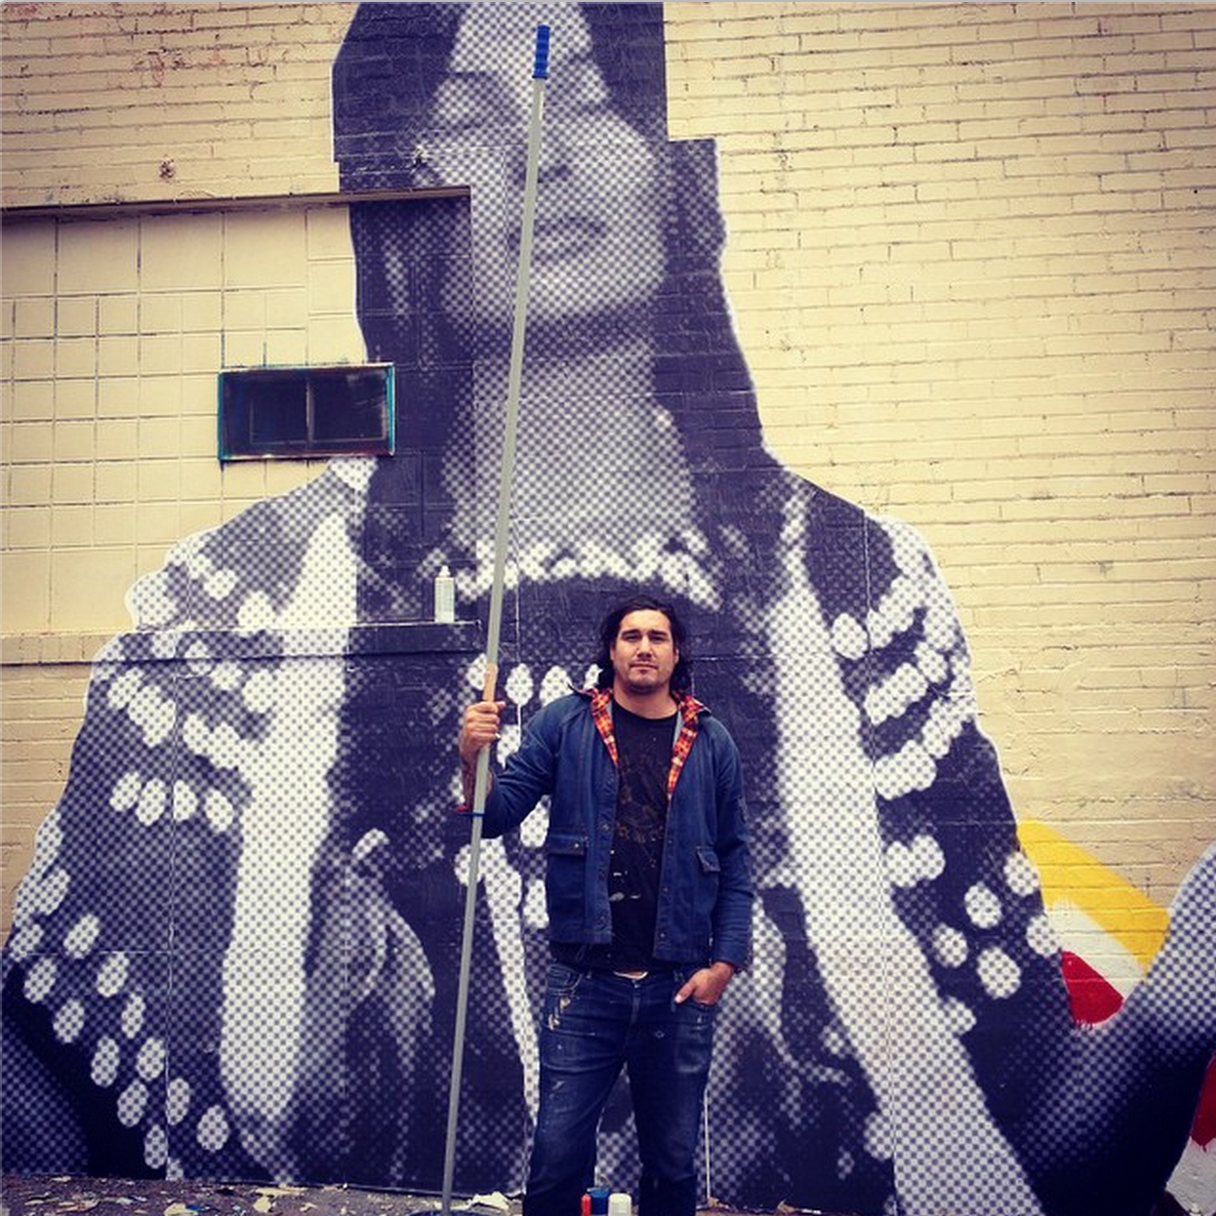 Cheyenne Randall completed the mural in one sitting with Santa Fe artist Jaque Fraqua. (Photo via Randall)